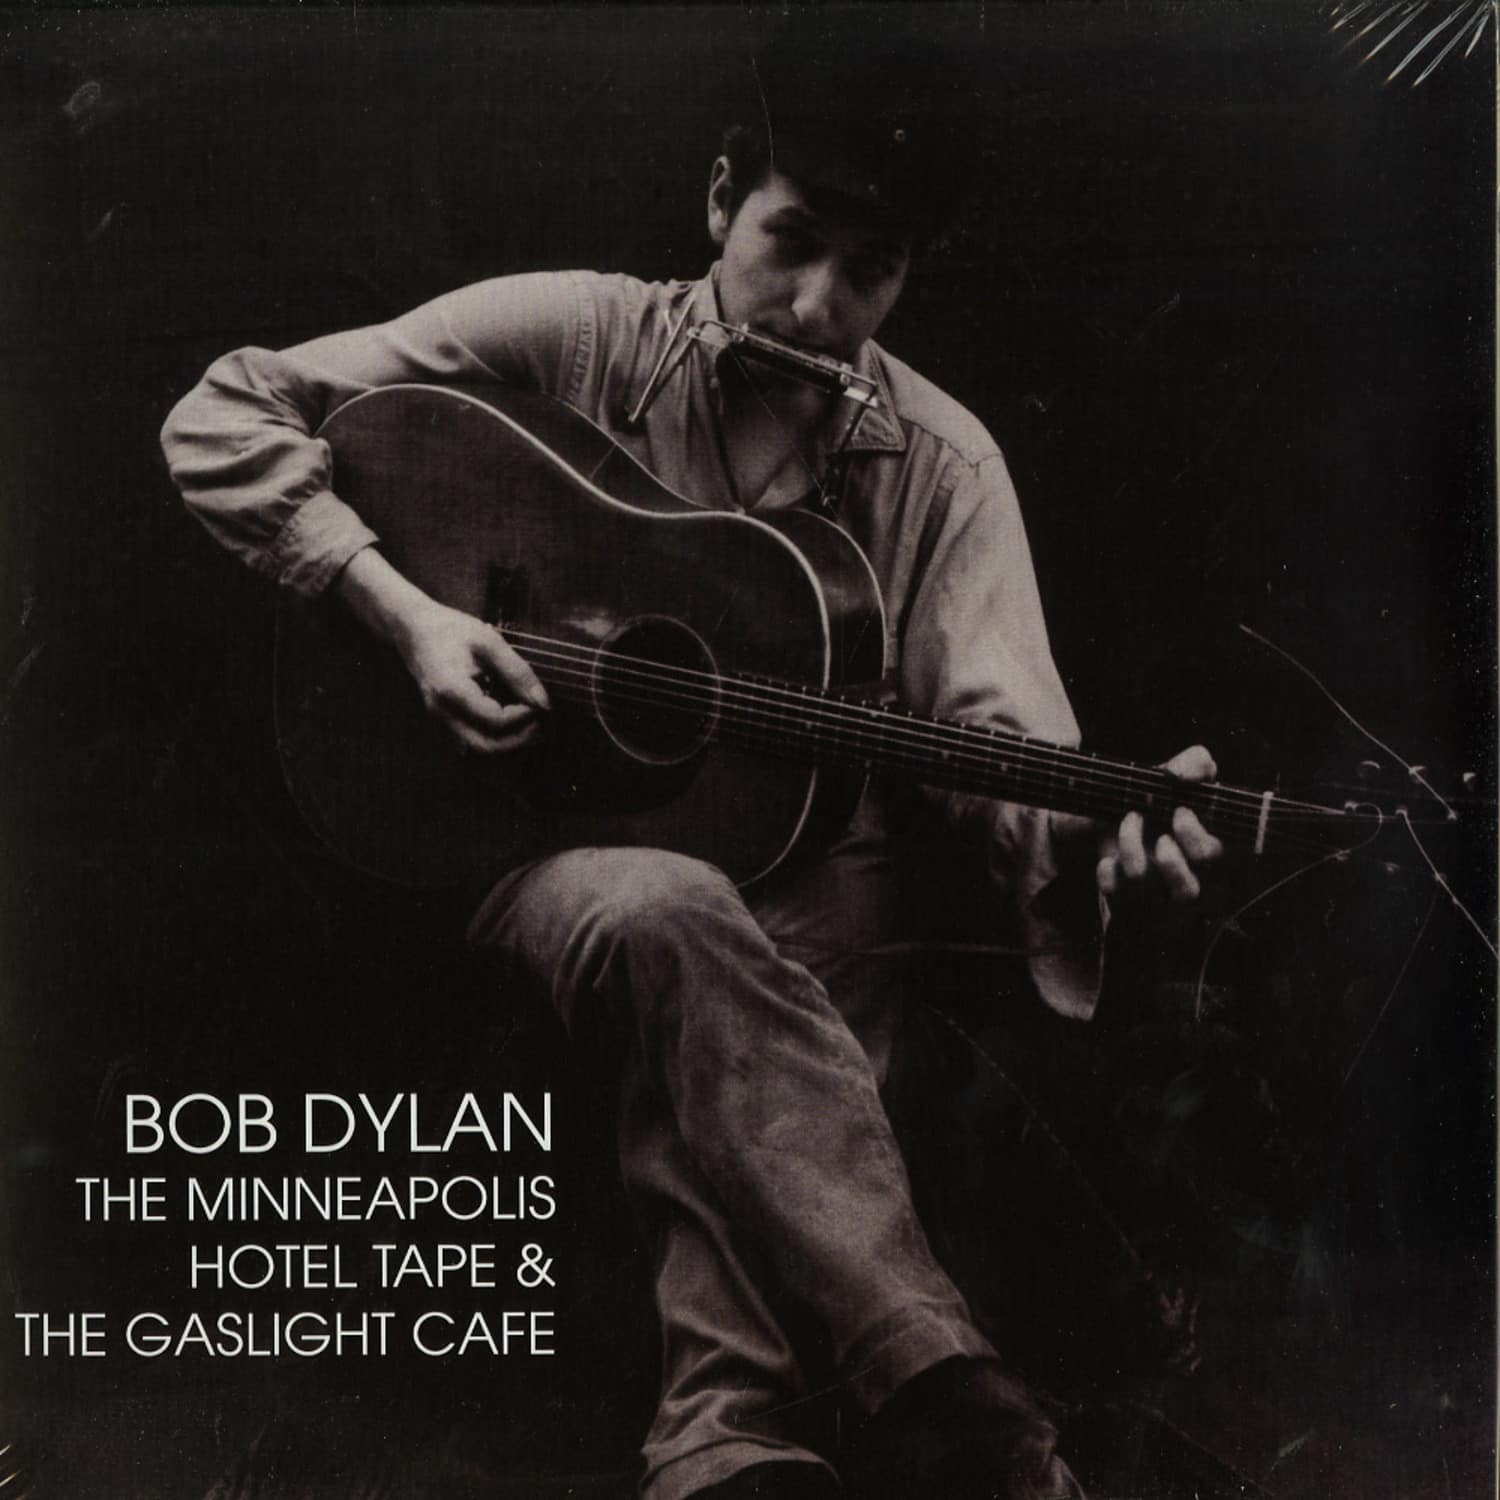 Bob Dylan - THE MINNEAPOLIS HOTEL TAPE & THE GASLIGHT CAFE 